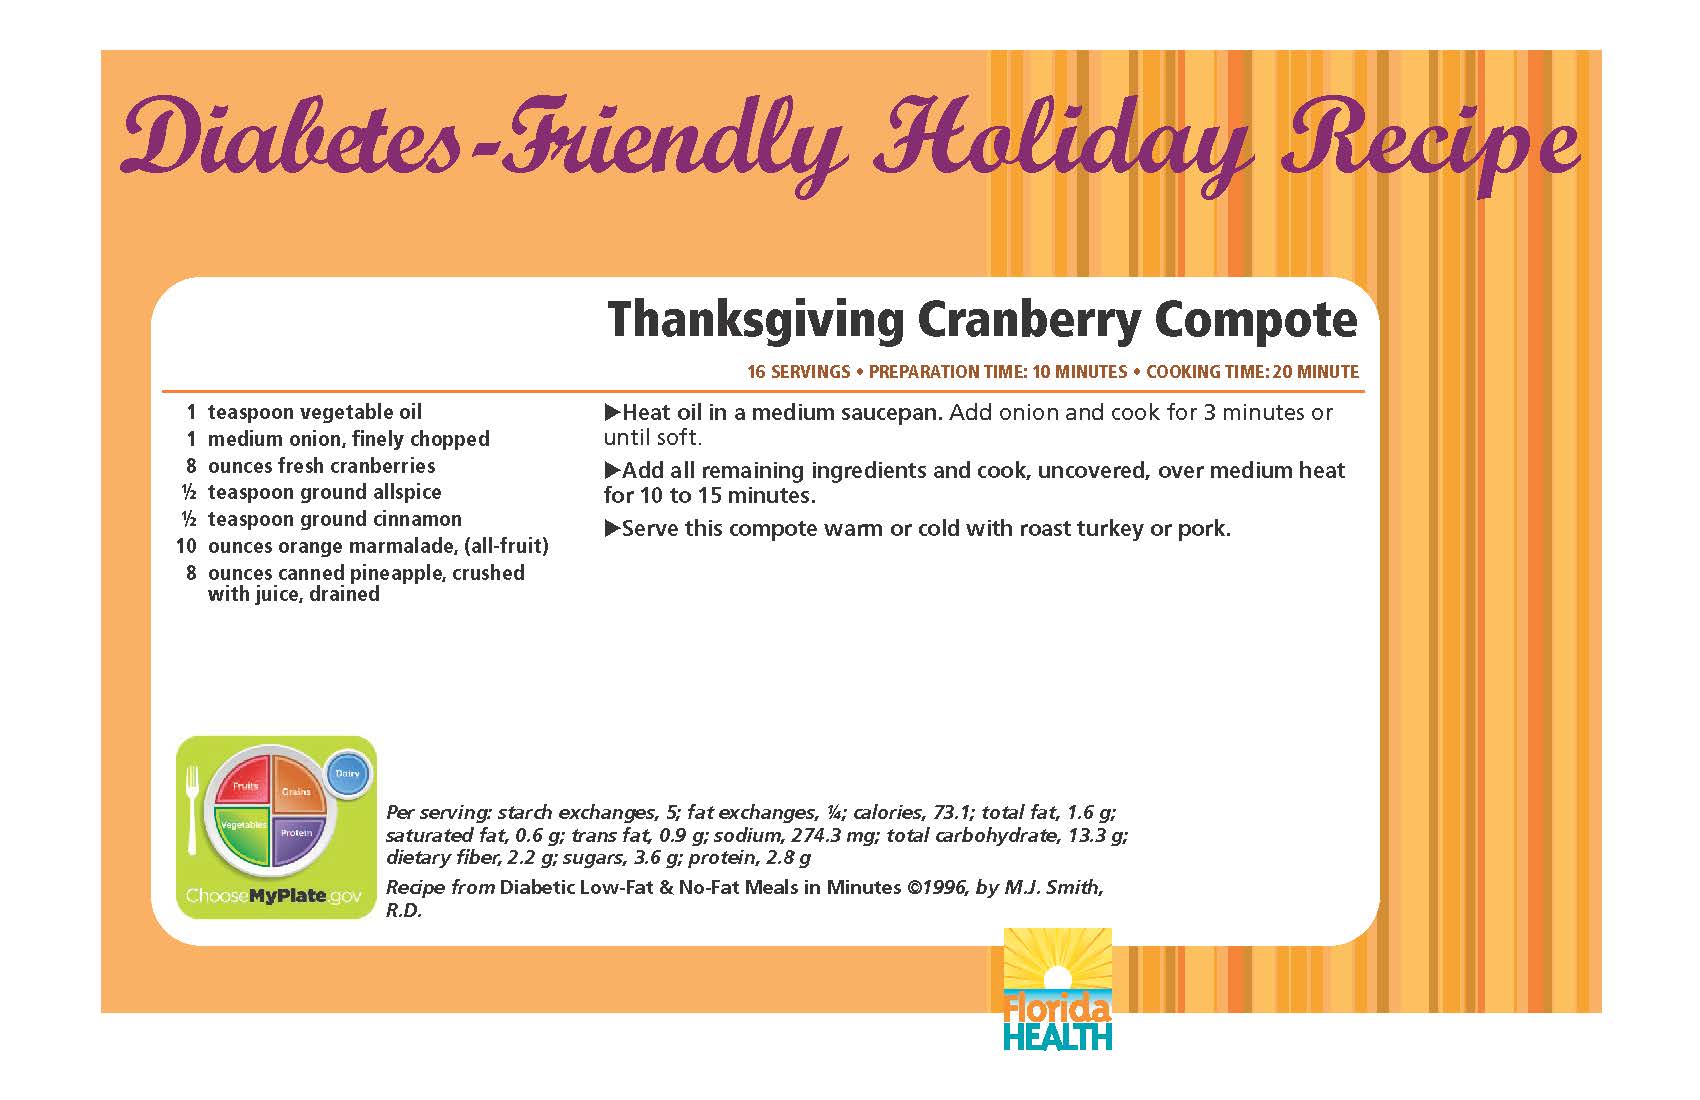 Diabetes-Friendly Holiday Recipe Thanksgiving Cranberry Compote 16 servings • preparation time: 10 minutes • cooking time: 20 minute 1 teaspoon vegetable oil 1 medium onion, finely chopped 8 ounces fresh cranberries ½ teaspoon ground allspice ½ teaspoon ground cinnamon 10 ounces orange marmalade, (all-fruit) 8 ounces canned pineapple, crushed with juice, drained Thanksgiving Cranberry Compote 16 servings • preparation time: 10 minutes • cooking time: 20 minute Heat oil in a medium saucepan. Add onion and cook for 3 minutes or until soft. Add all remaining ingredients and cook, uncovered, over medium heat for 10 to 15 minutes. Serve this compote warm or cold with roast turkey or pork. Per serving: starch exchanges, 5; fat exchanges, ¼; calories, 73.1; total fat, 1.6 g; saturated fat, 0.6 g; trans fat, 0.9 g; sodium, 274.3 mg; total carbohydrate, 13.3 g; dietary fiber, 2.2 g; sugars, 3.6 g; protein, 2.8 g Recipe from Diabetic Low-Fat & No-Fat Meals in Minutes ©1996, by M.J. Smith, R.D.